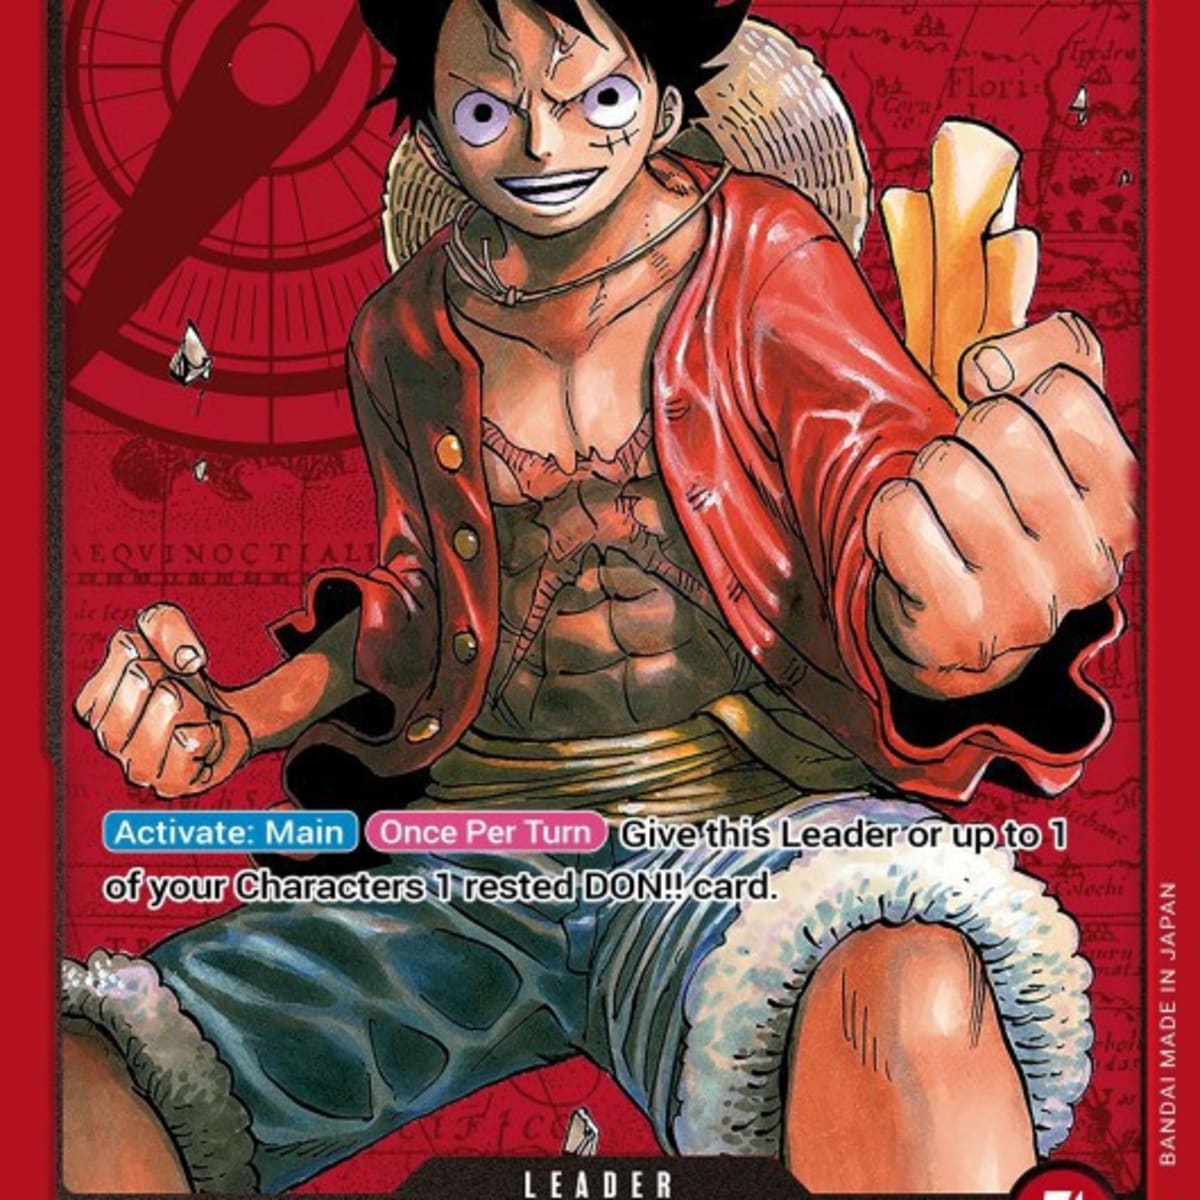 BEGINNERS GUIDE, PROJECT: ONE PIECE